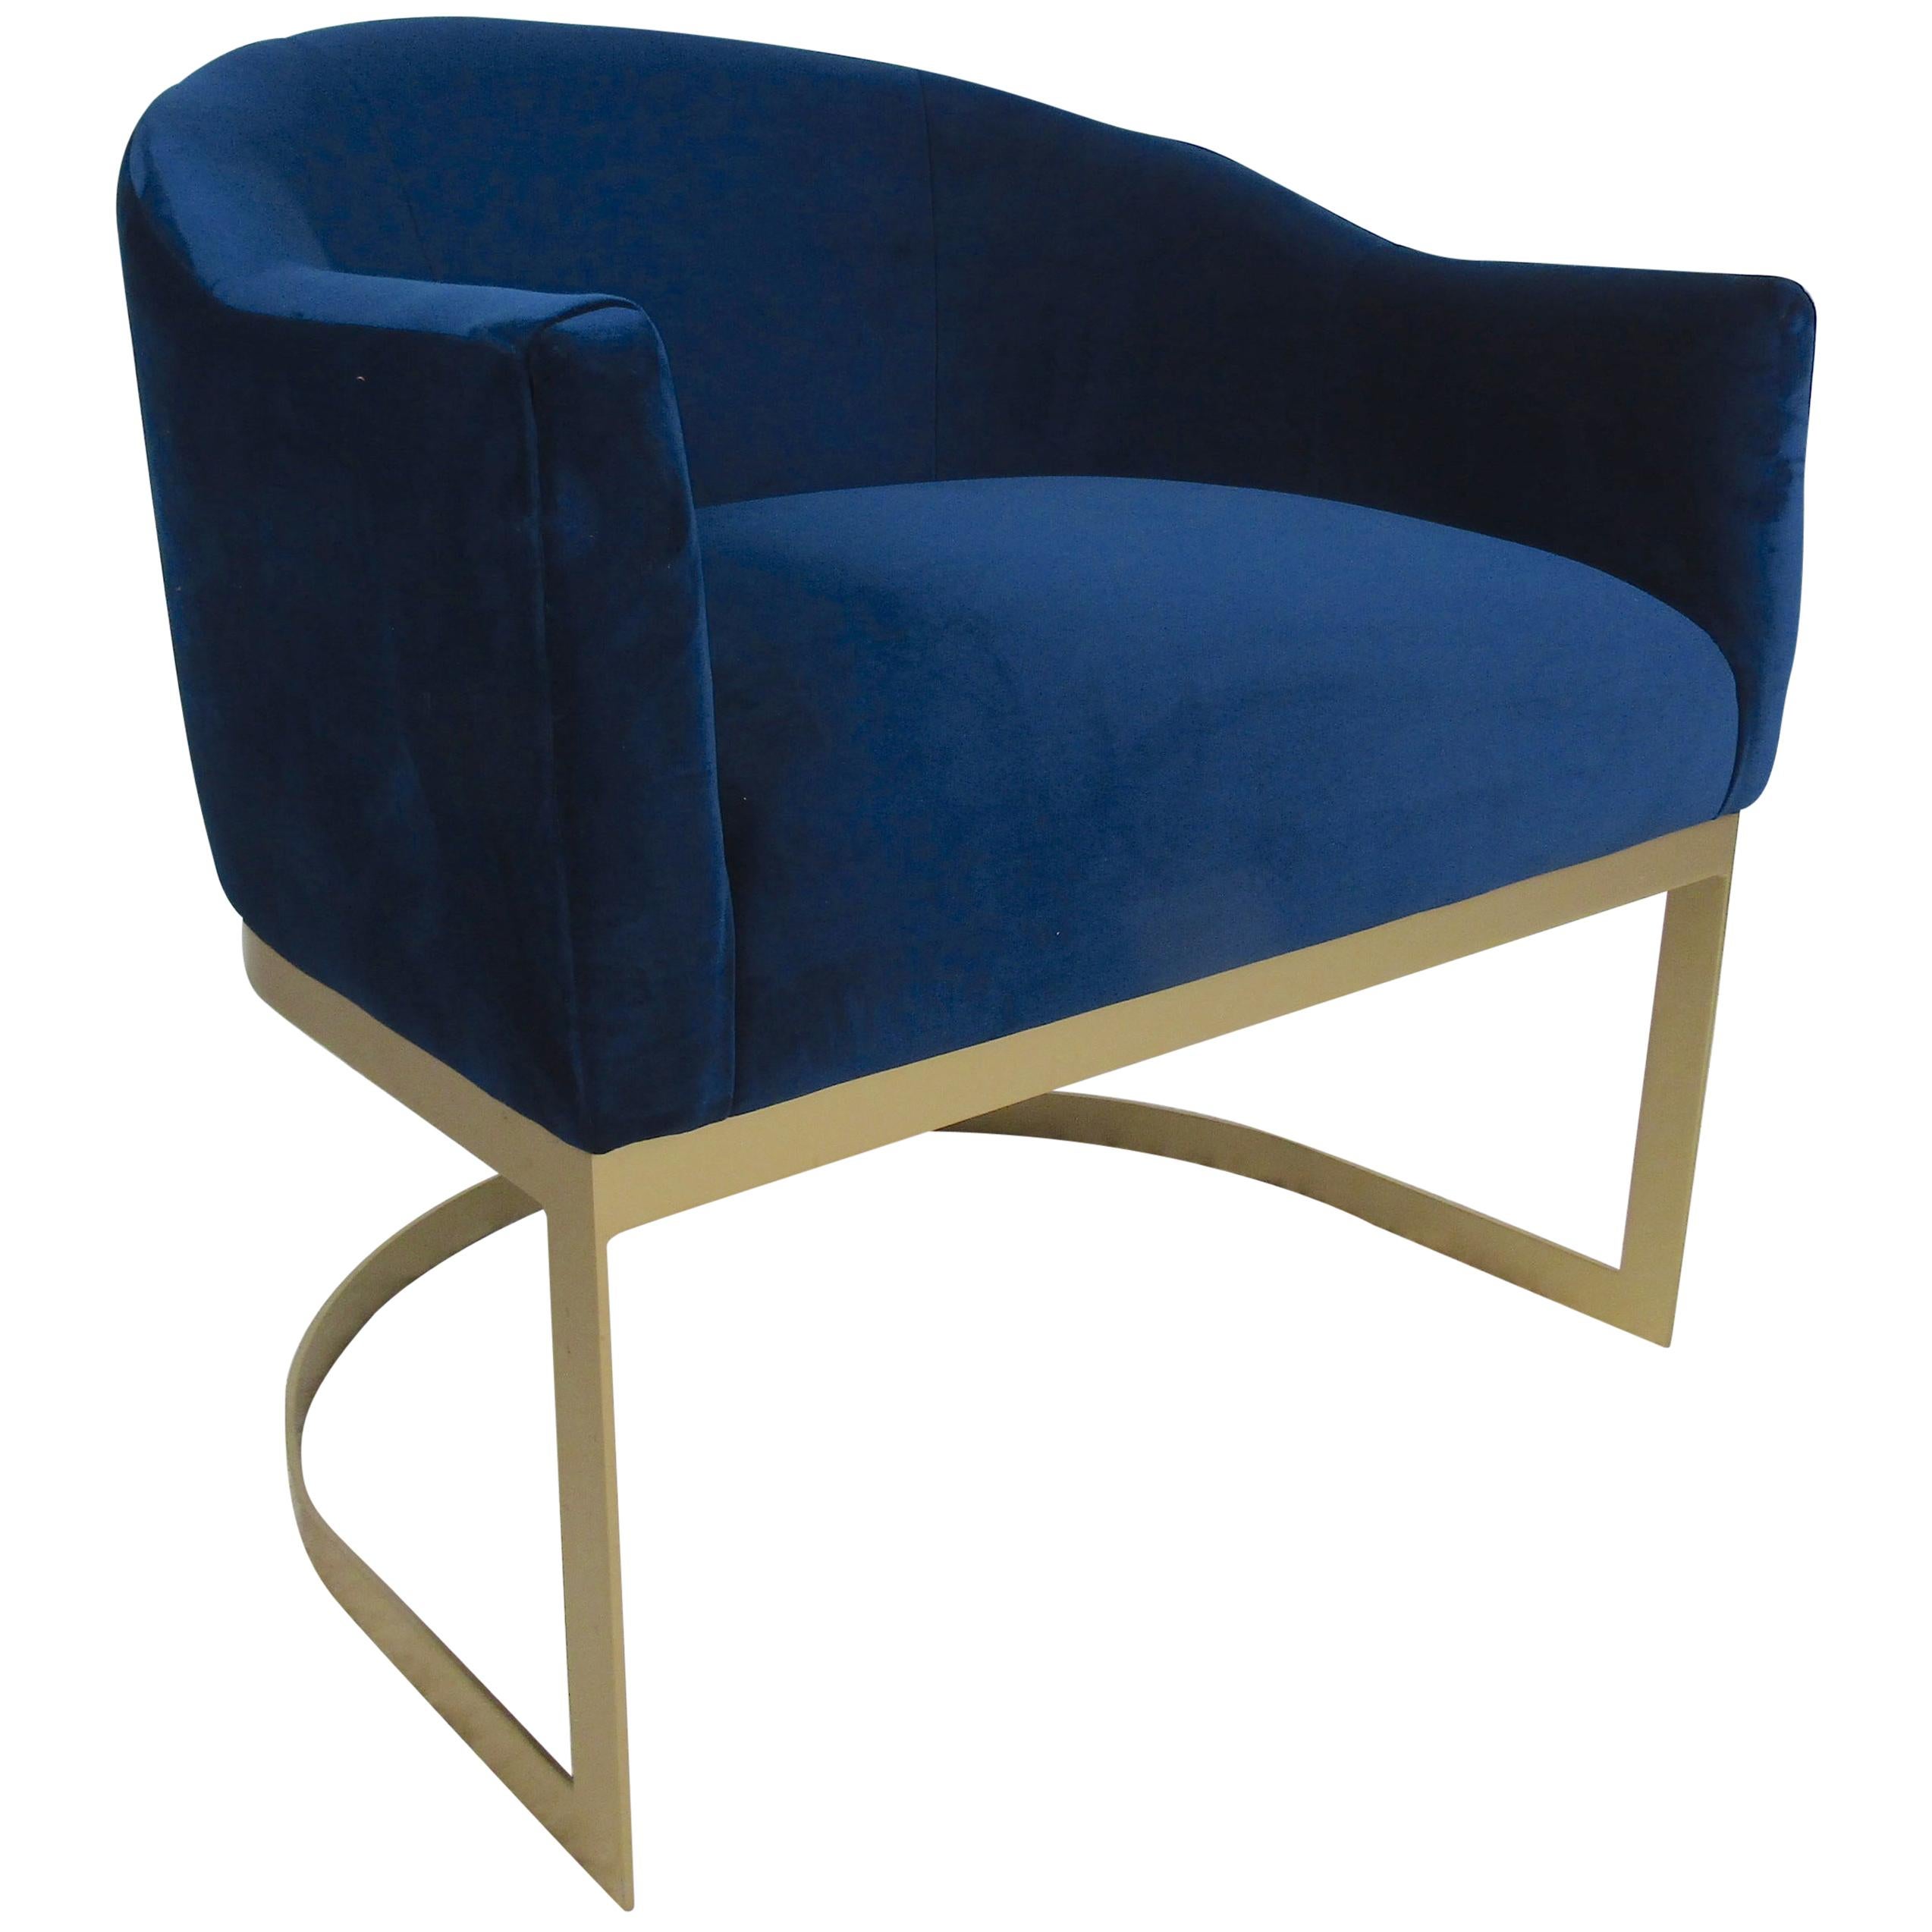 Unusual Vintage Cantilever Blue Lounge Chair For Sale